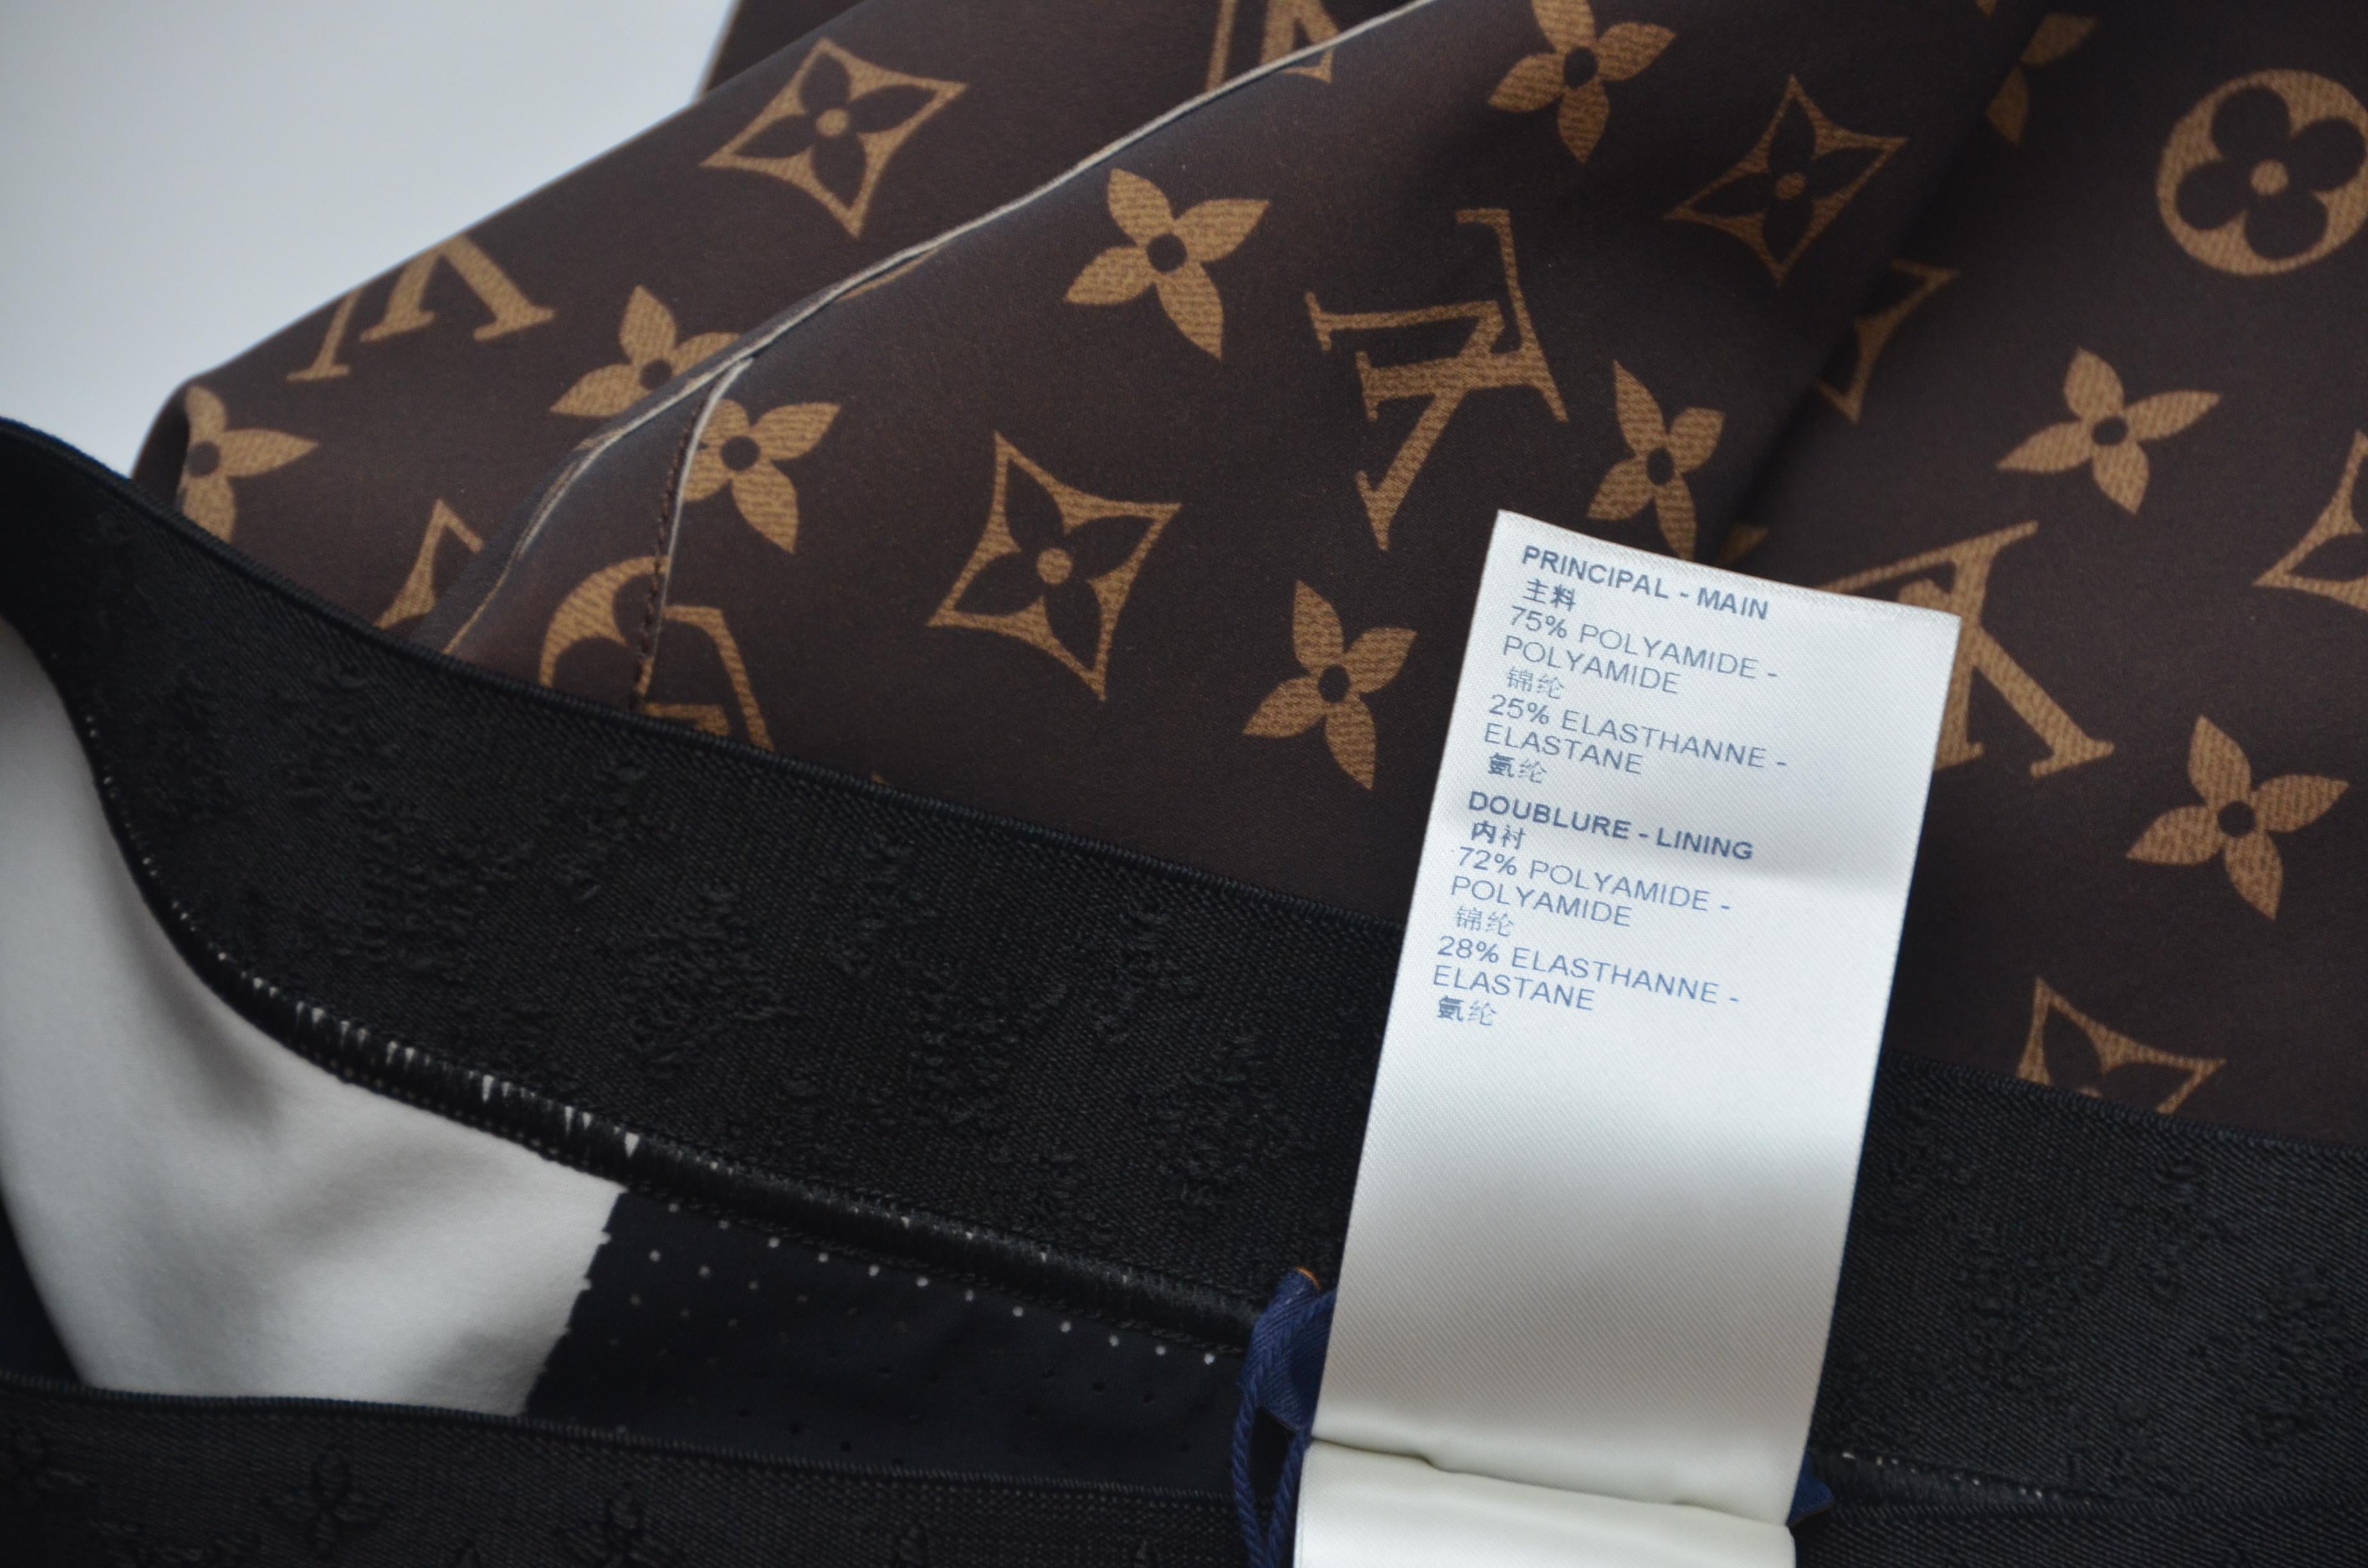 100% authentic guaranteed Louis Vuitton Shiny Monogram Leggings  
A sporty staple with a Louis Vuitton twist: these classic leggings are elevated with a shiny allover Monogram motif printed on comfortable technical jersey with a flattering